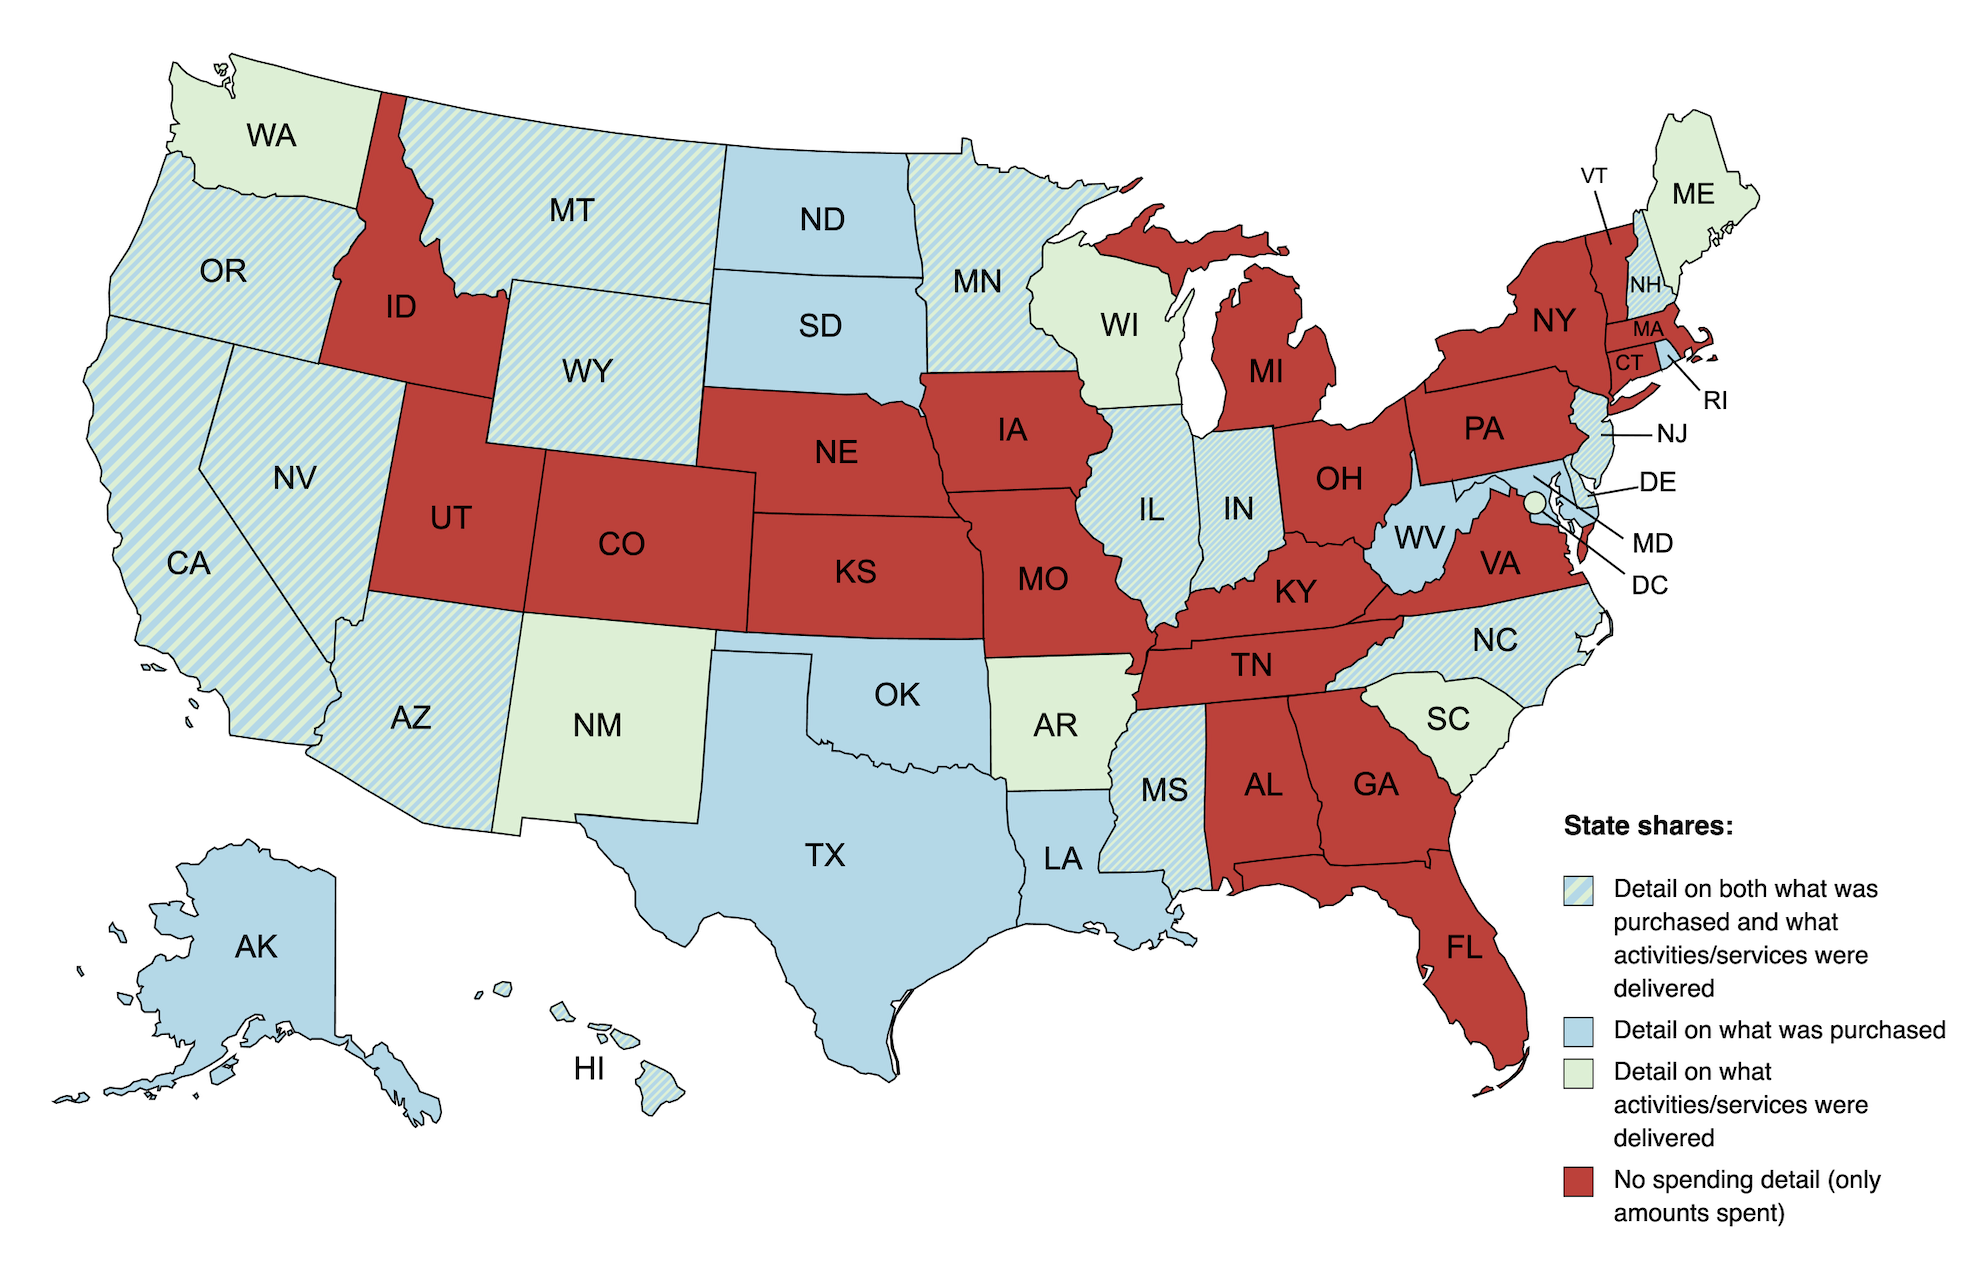 US map showing ESSER spending details as shown by state